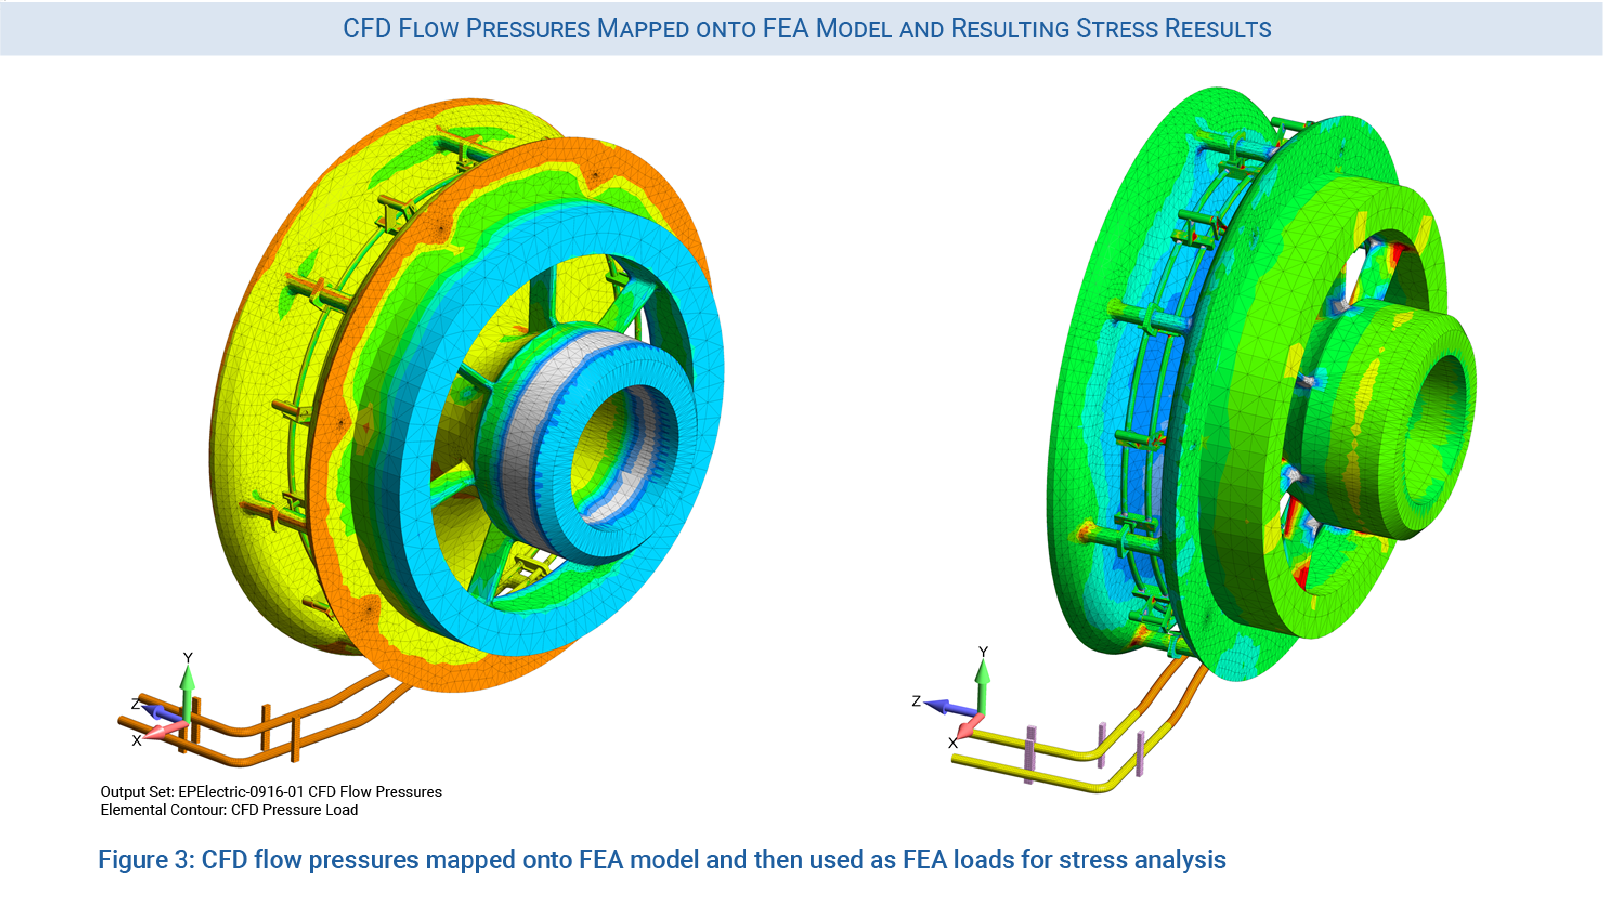 CFD flow pressure mapped onto FEA model and then used as loads for stress analysis